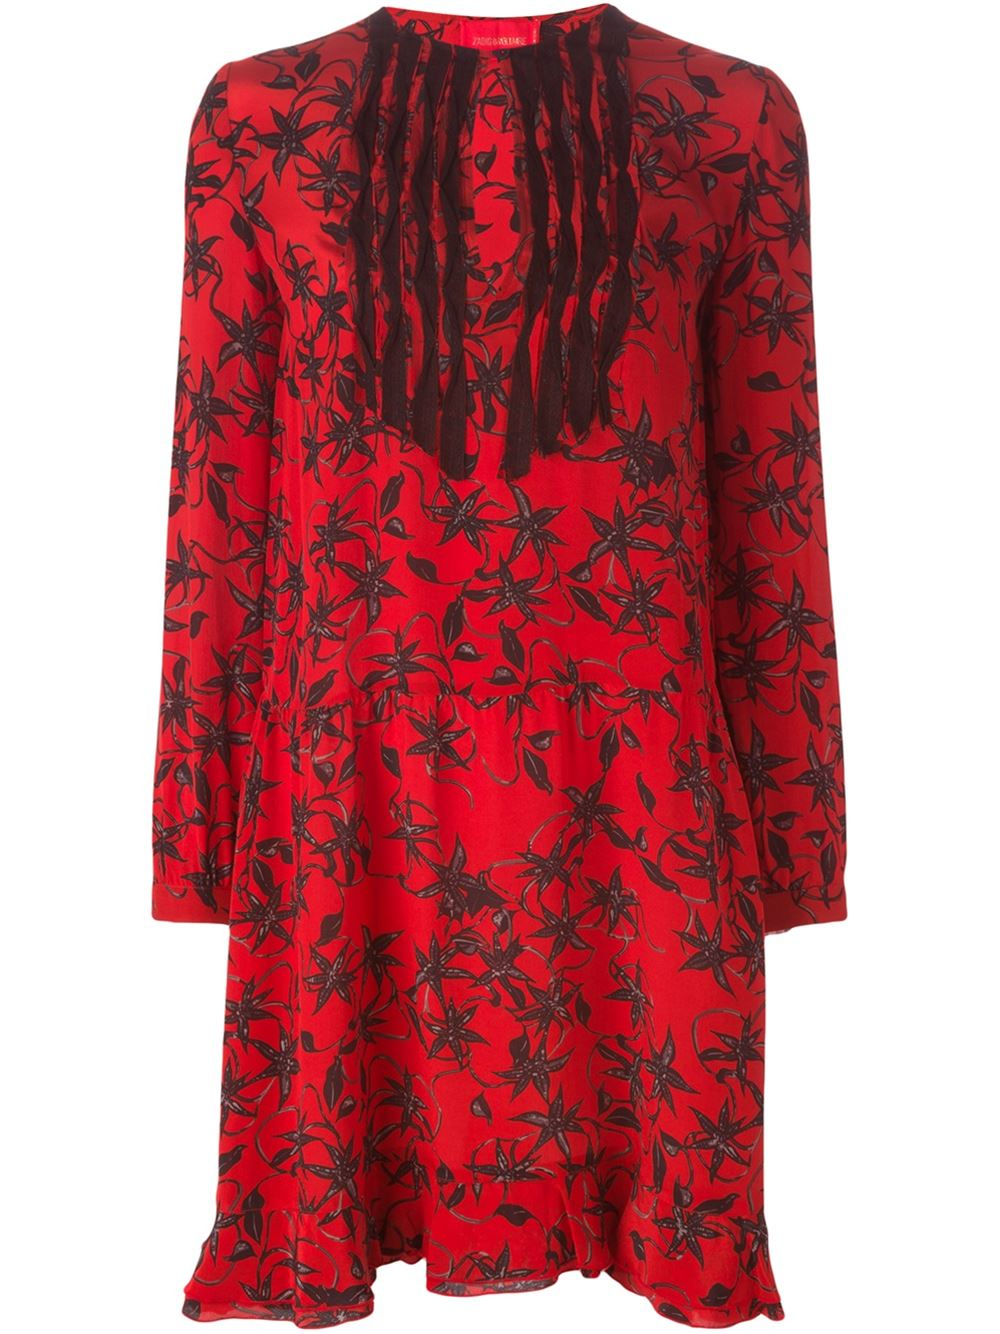 Zadig & Voltaire 'remus' Dress in Red - Lyst